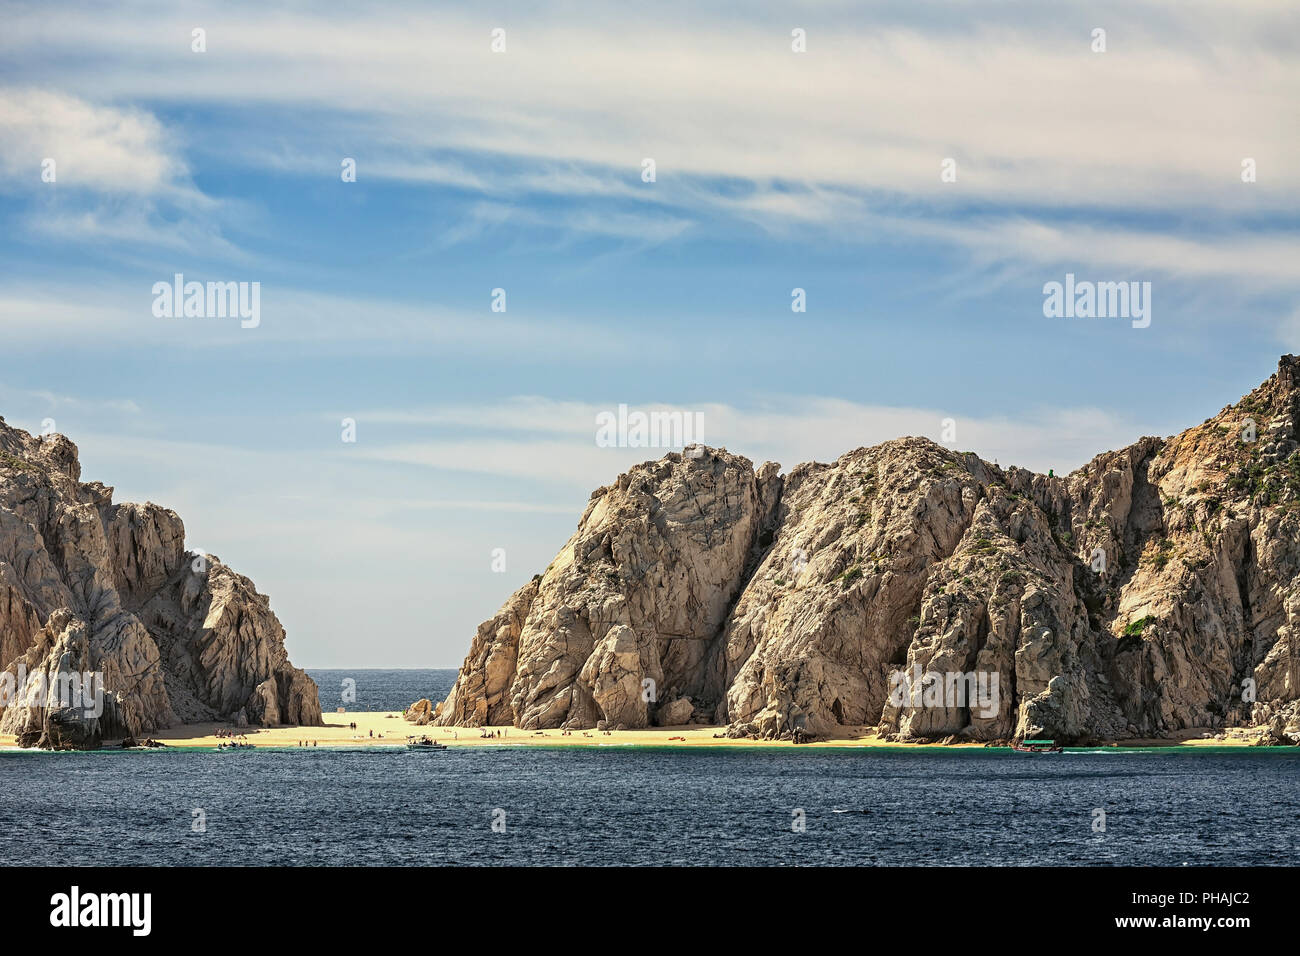 Natural rock formations in Cabo San Lucas, Mexico Stock Photo